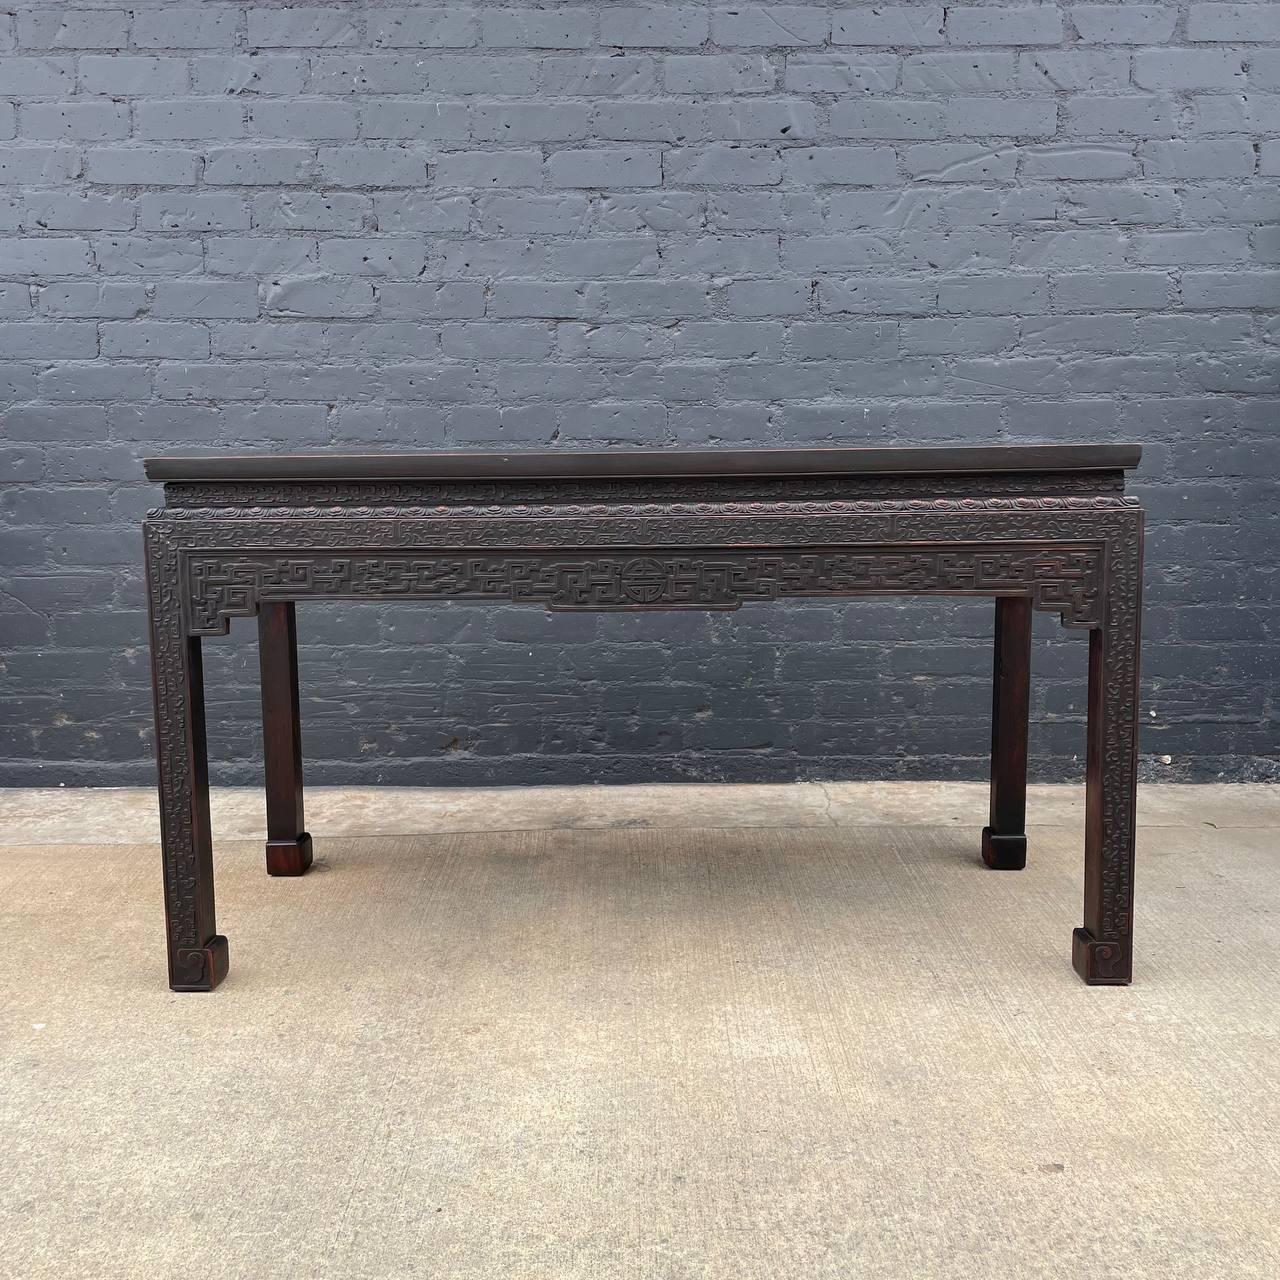 Antique Chinese Hand Carved Wood Console Table In Excellent Condition For Sale In Los Angeles, CA